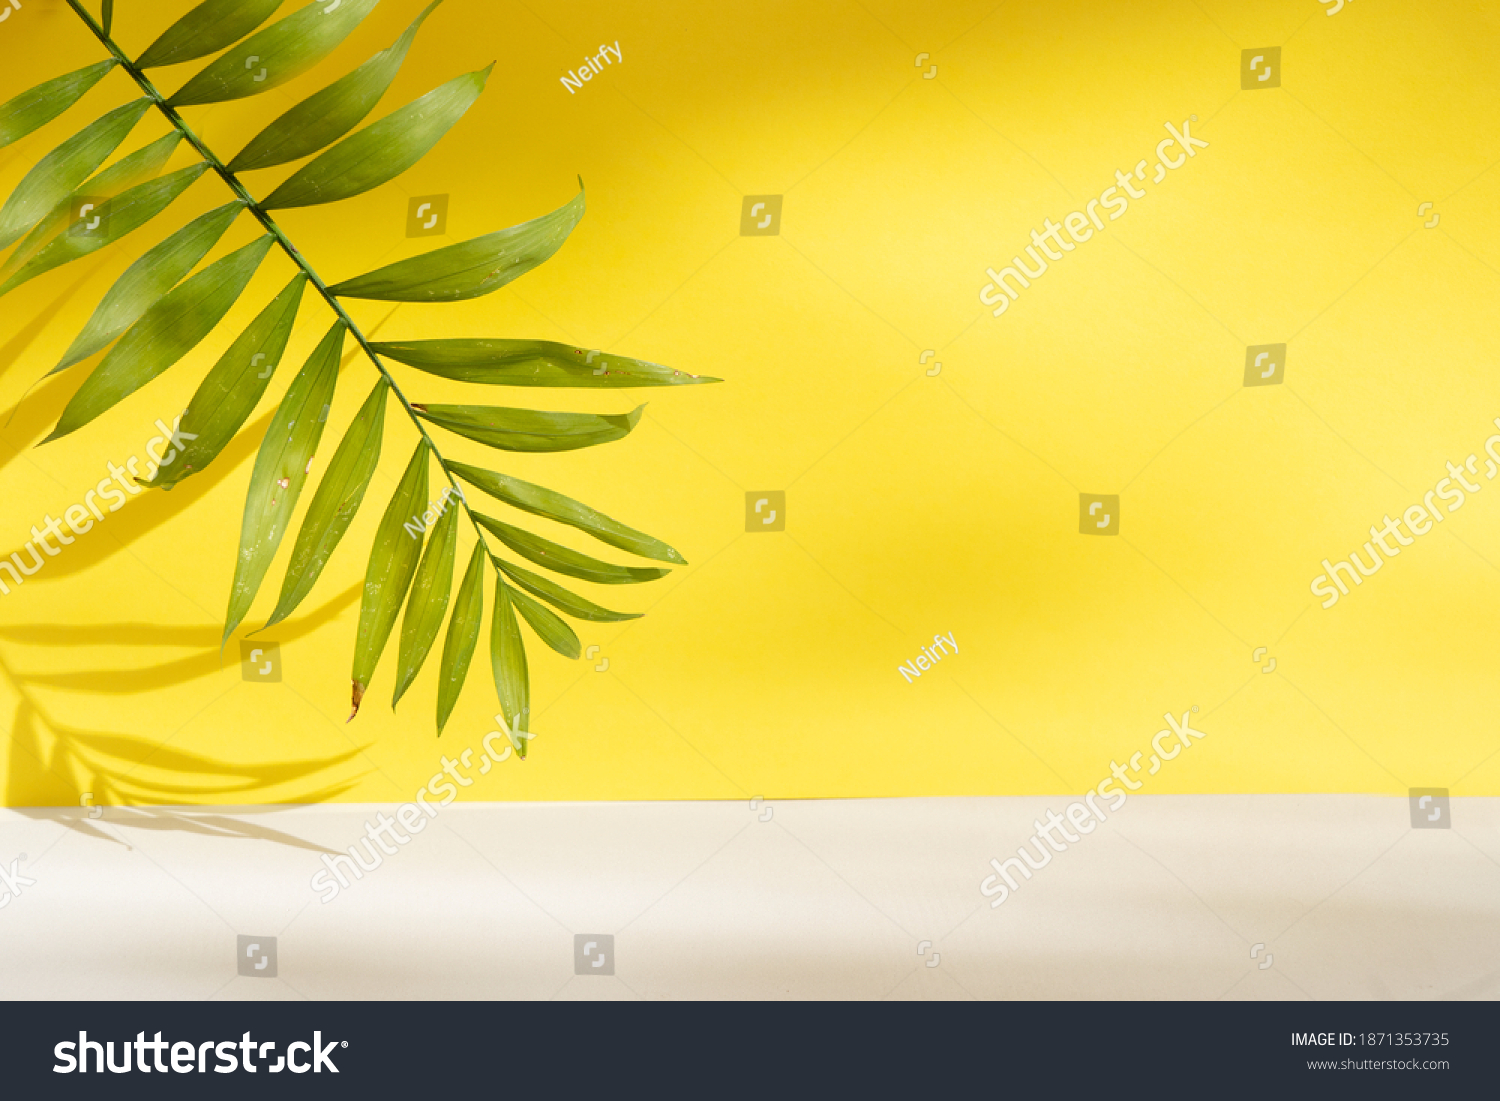 Minimal modern product display on textured gray and yellow background with fresh palm leaves and shadows #1871353735